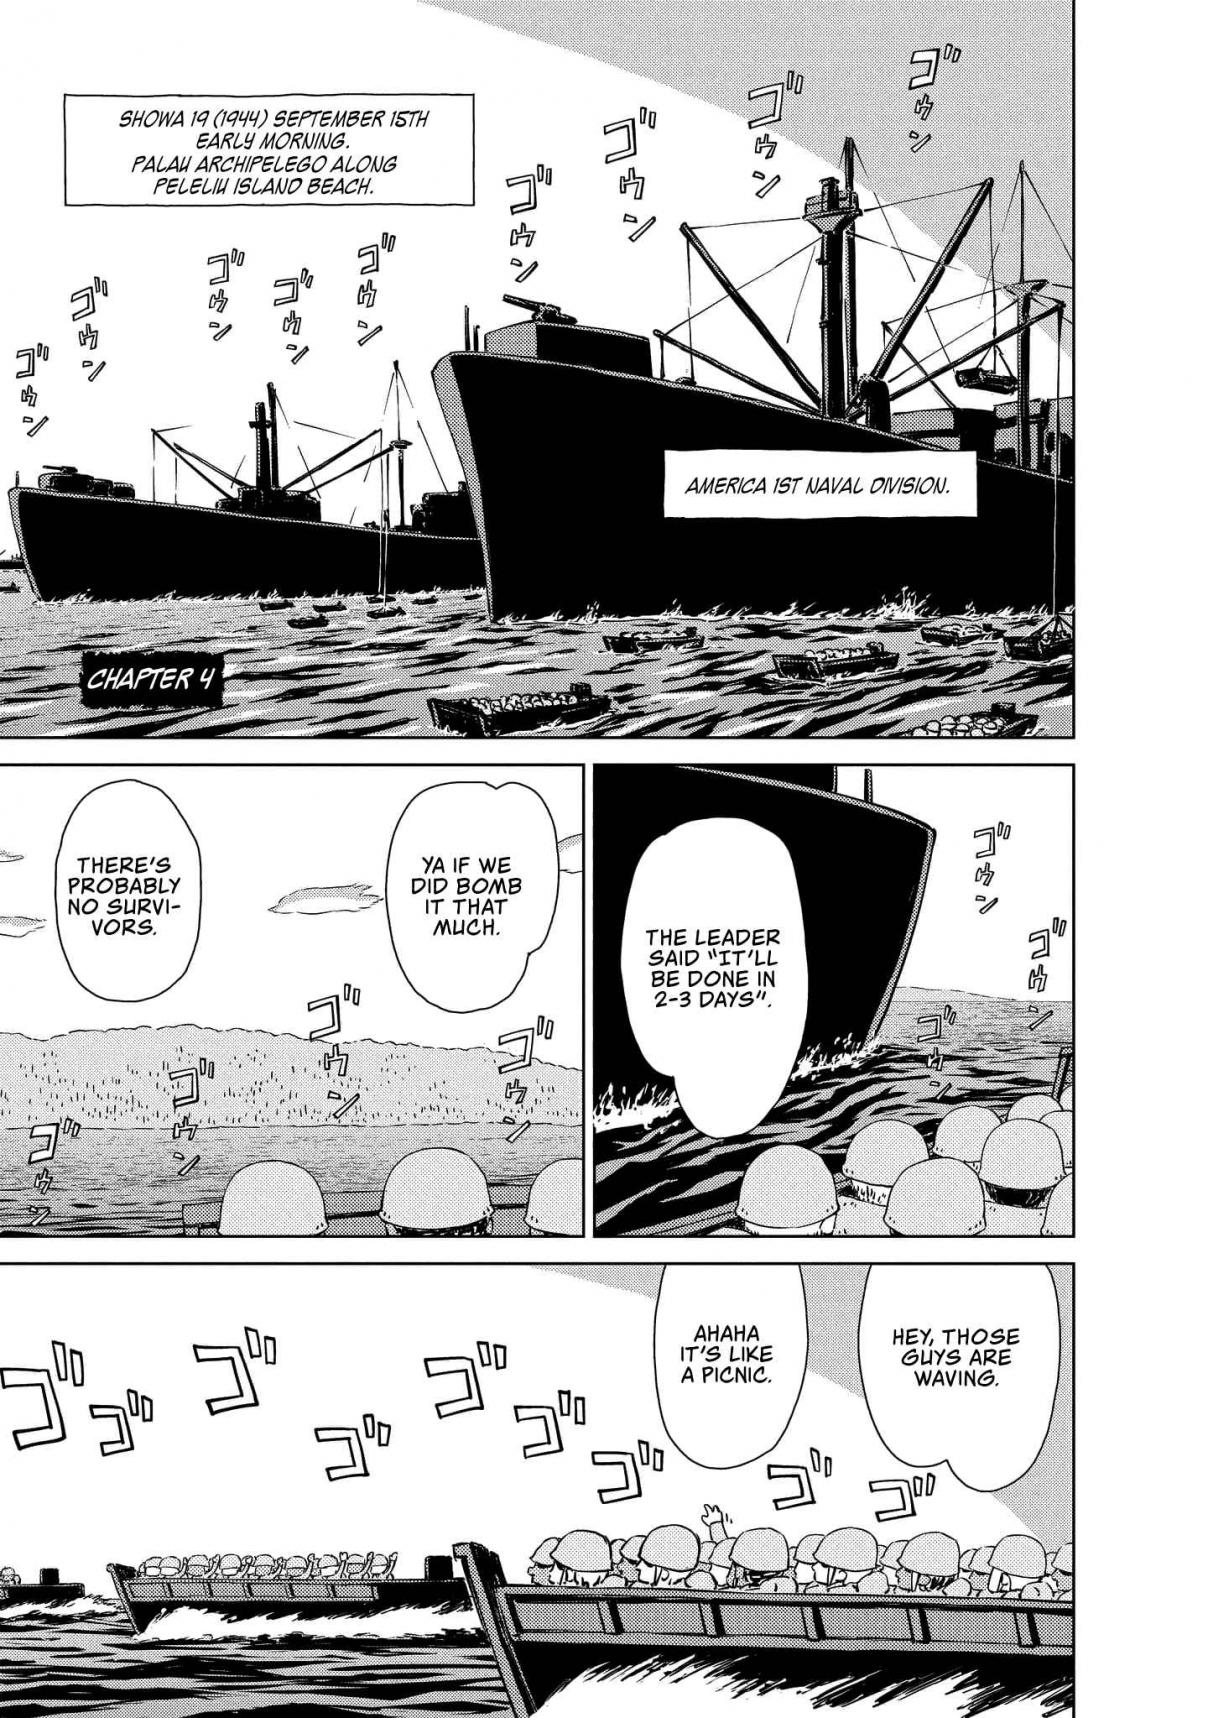 Peleliu: Guernica of Paradise Vol. 1 Ch. 4 Morning of the Fight